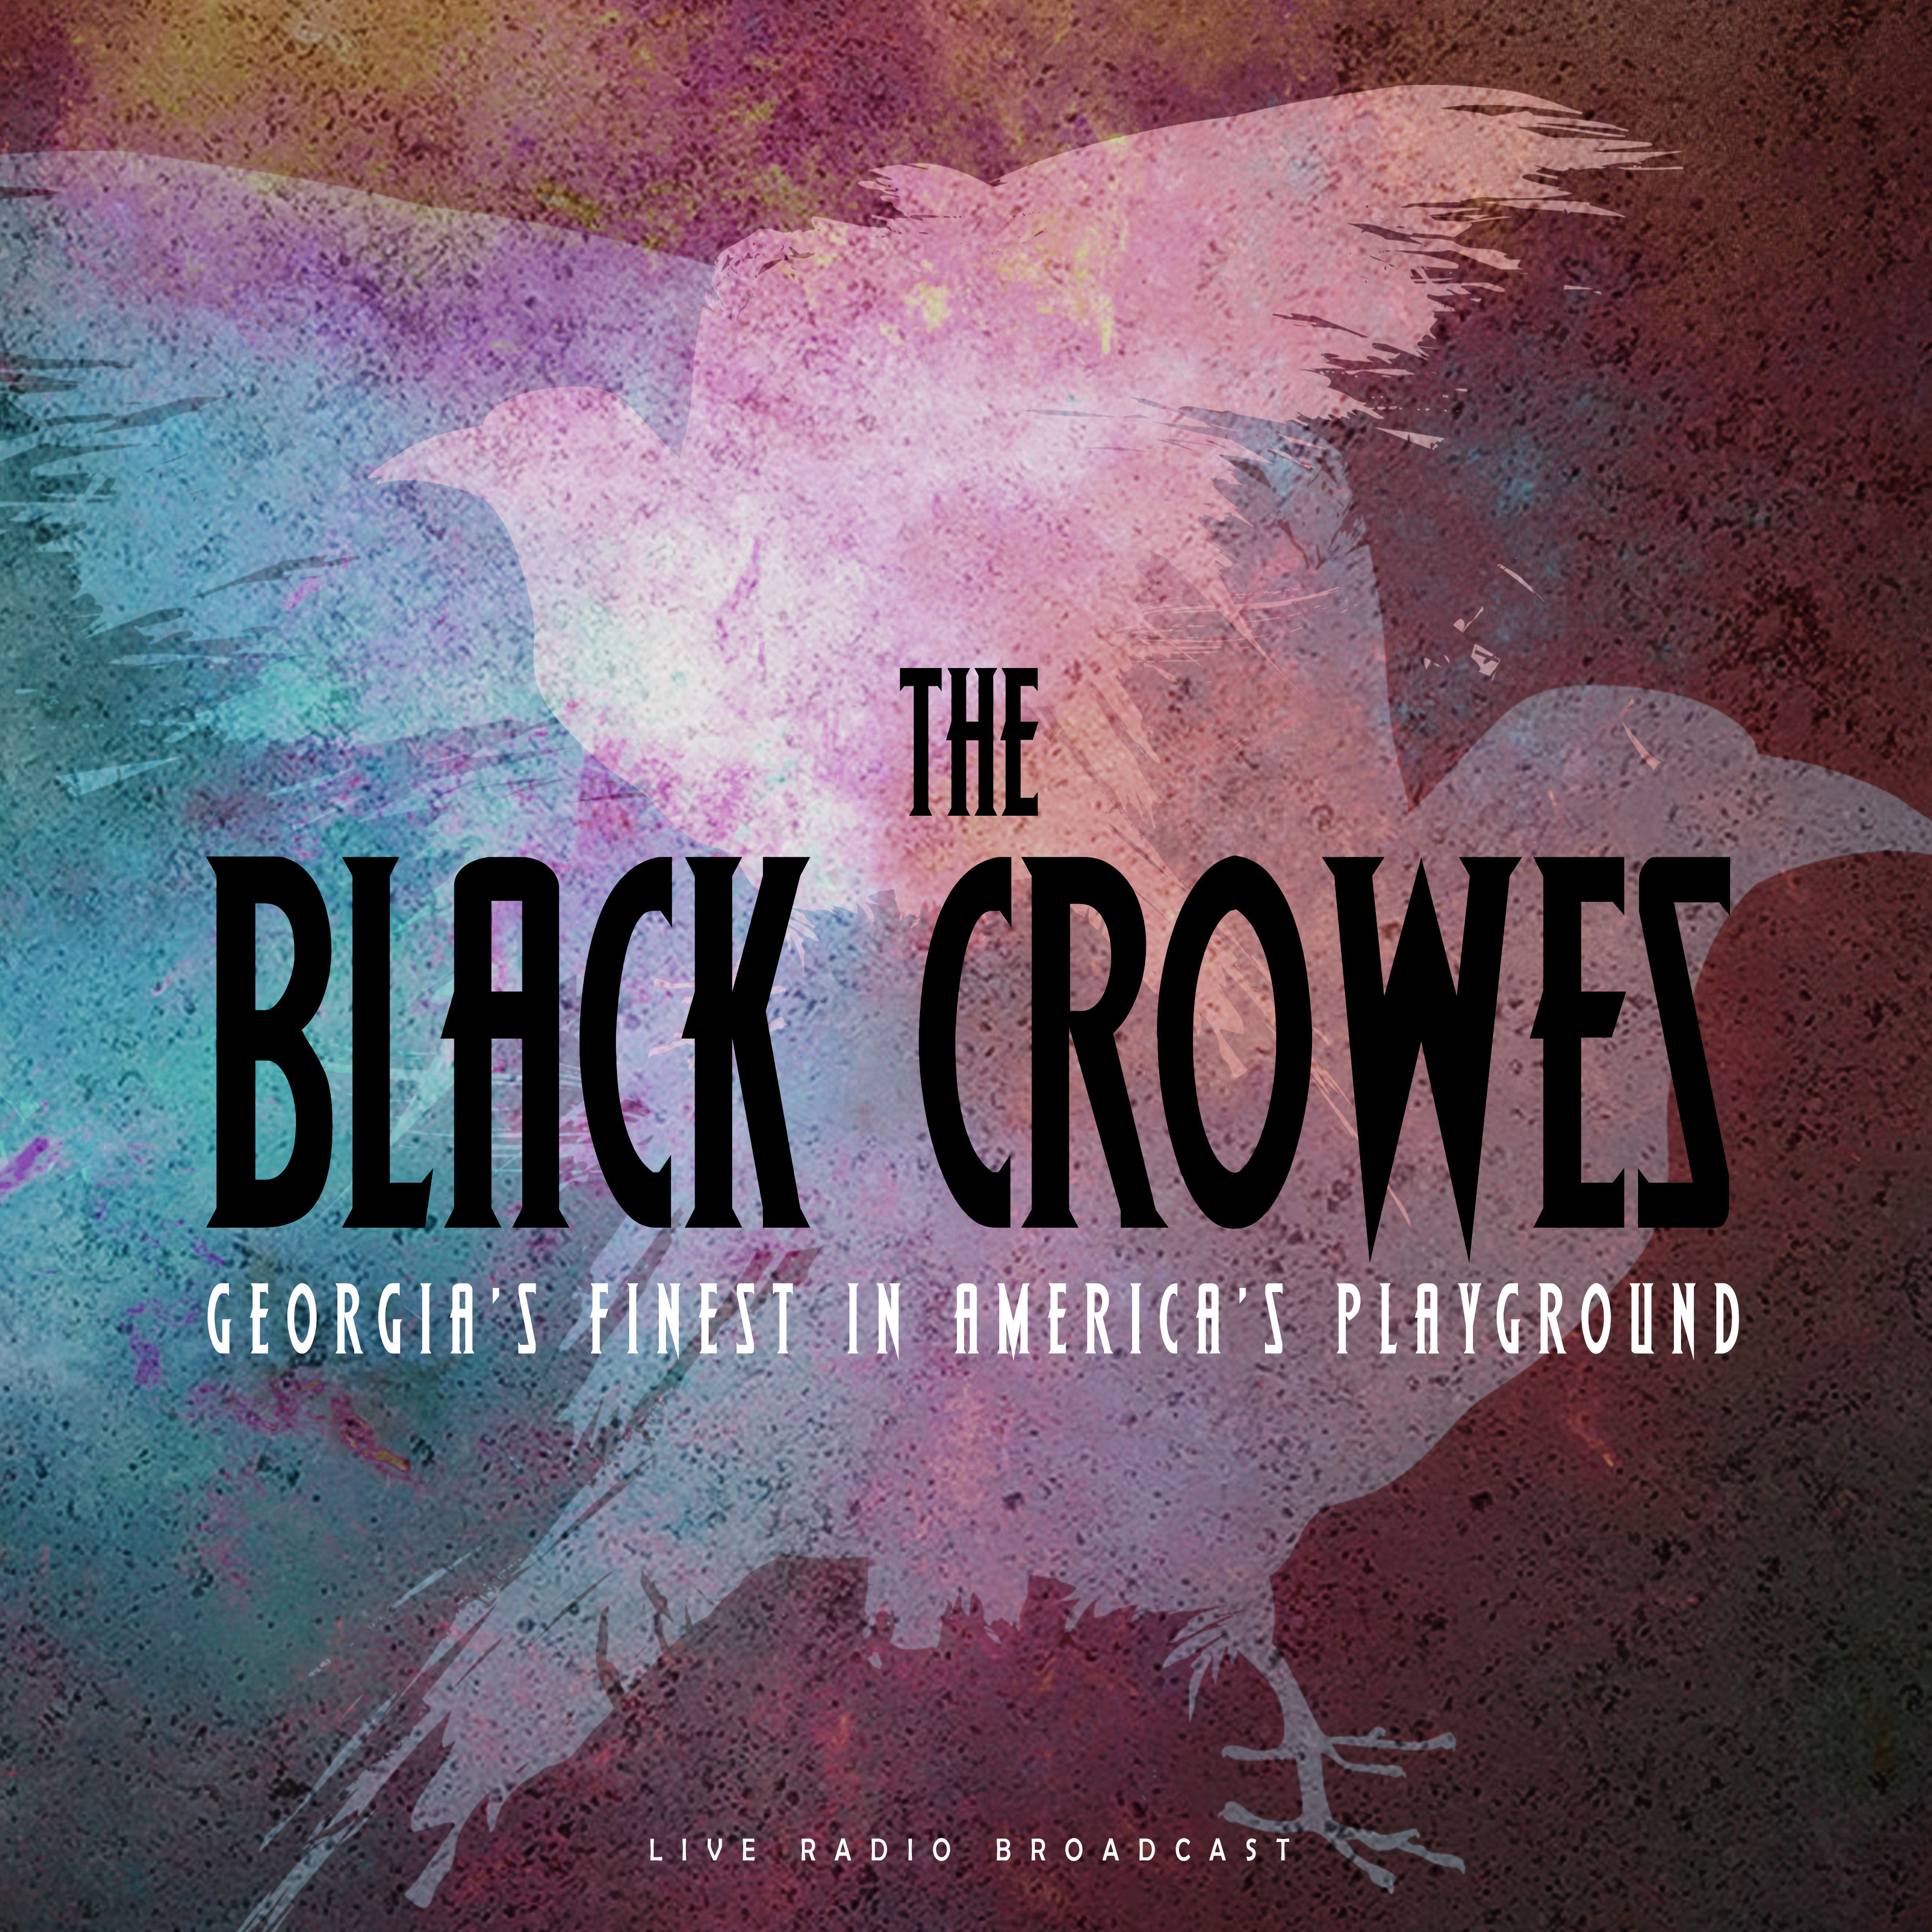 The Black Crowes - 2021 - Georgia's Finest In America's Playground (live)